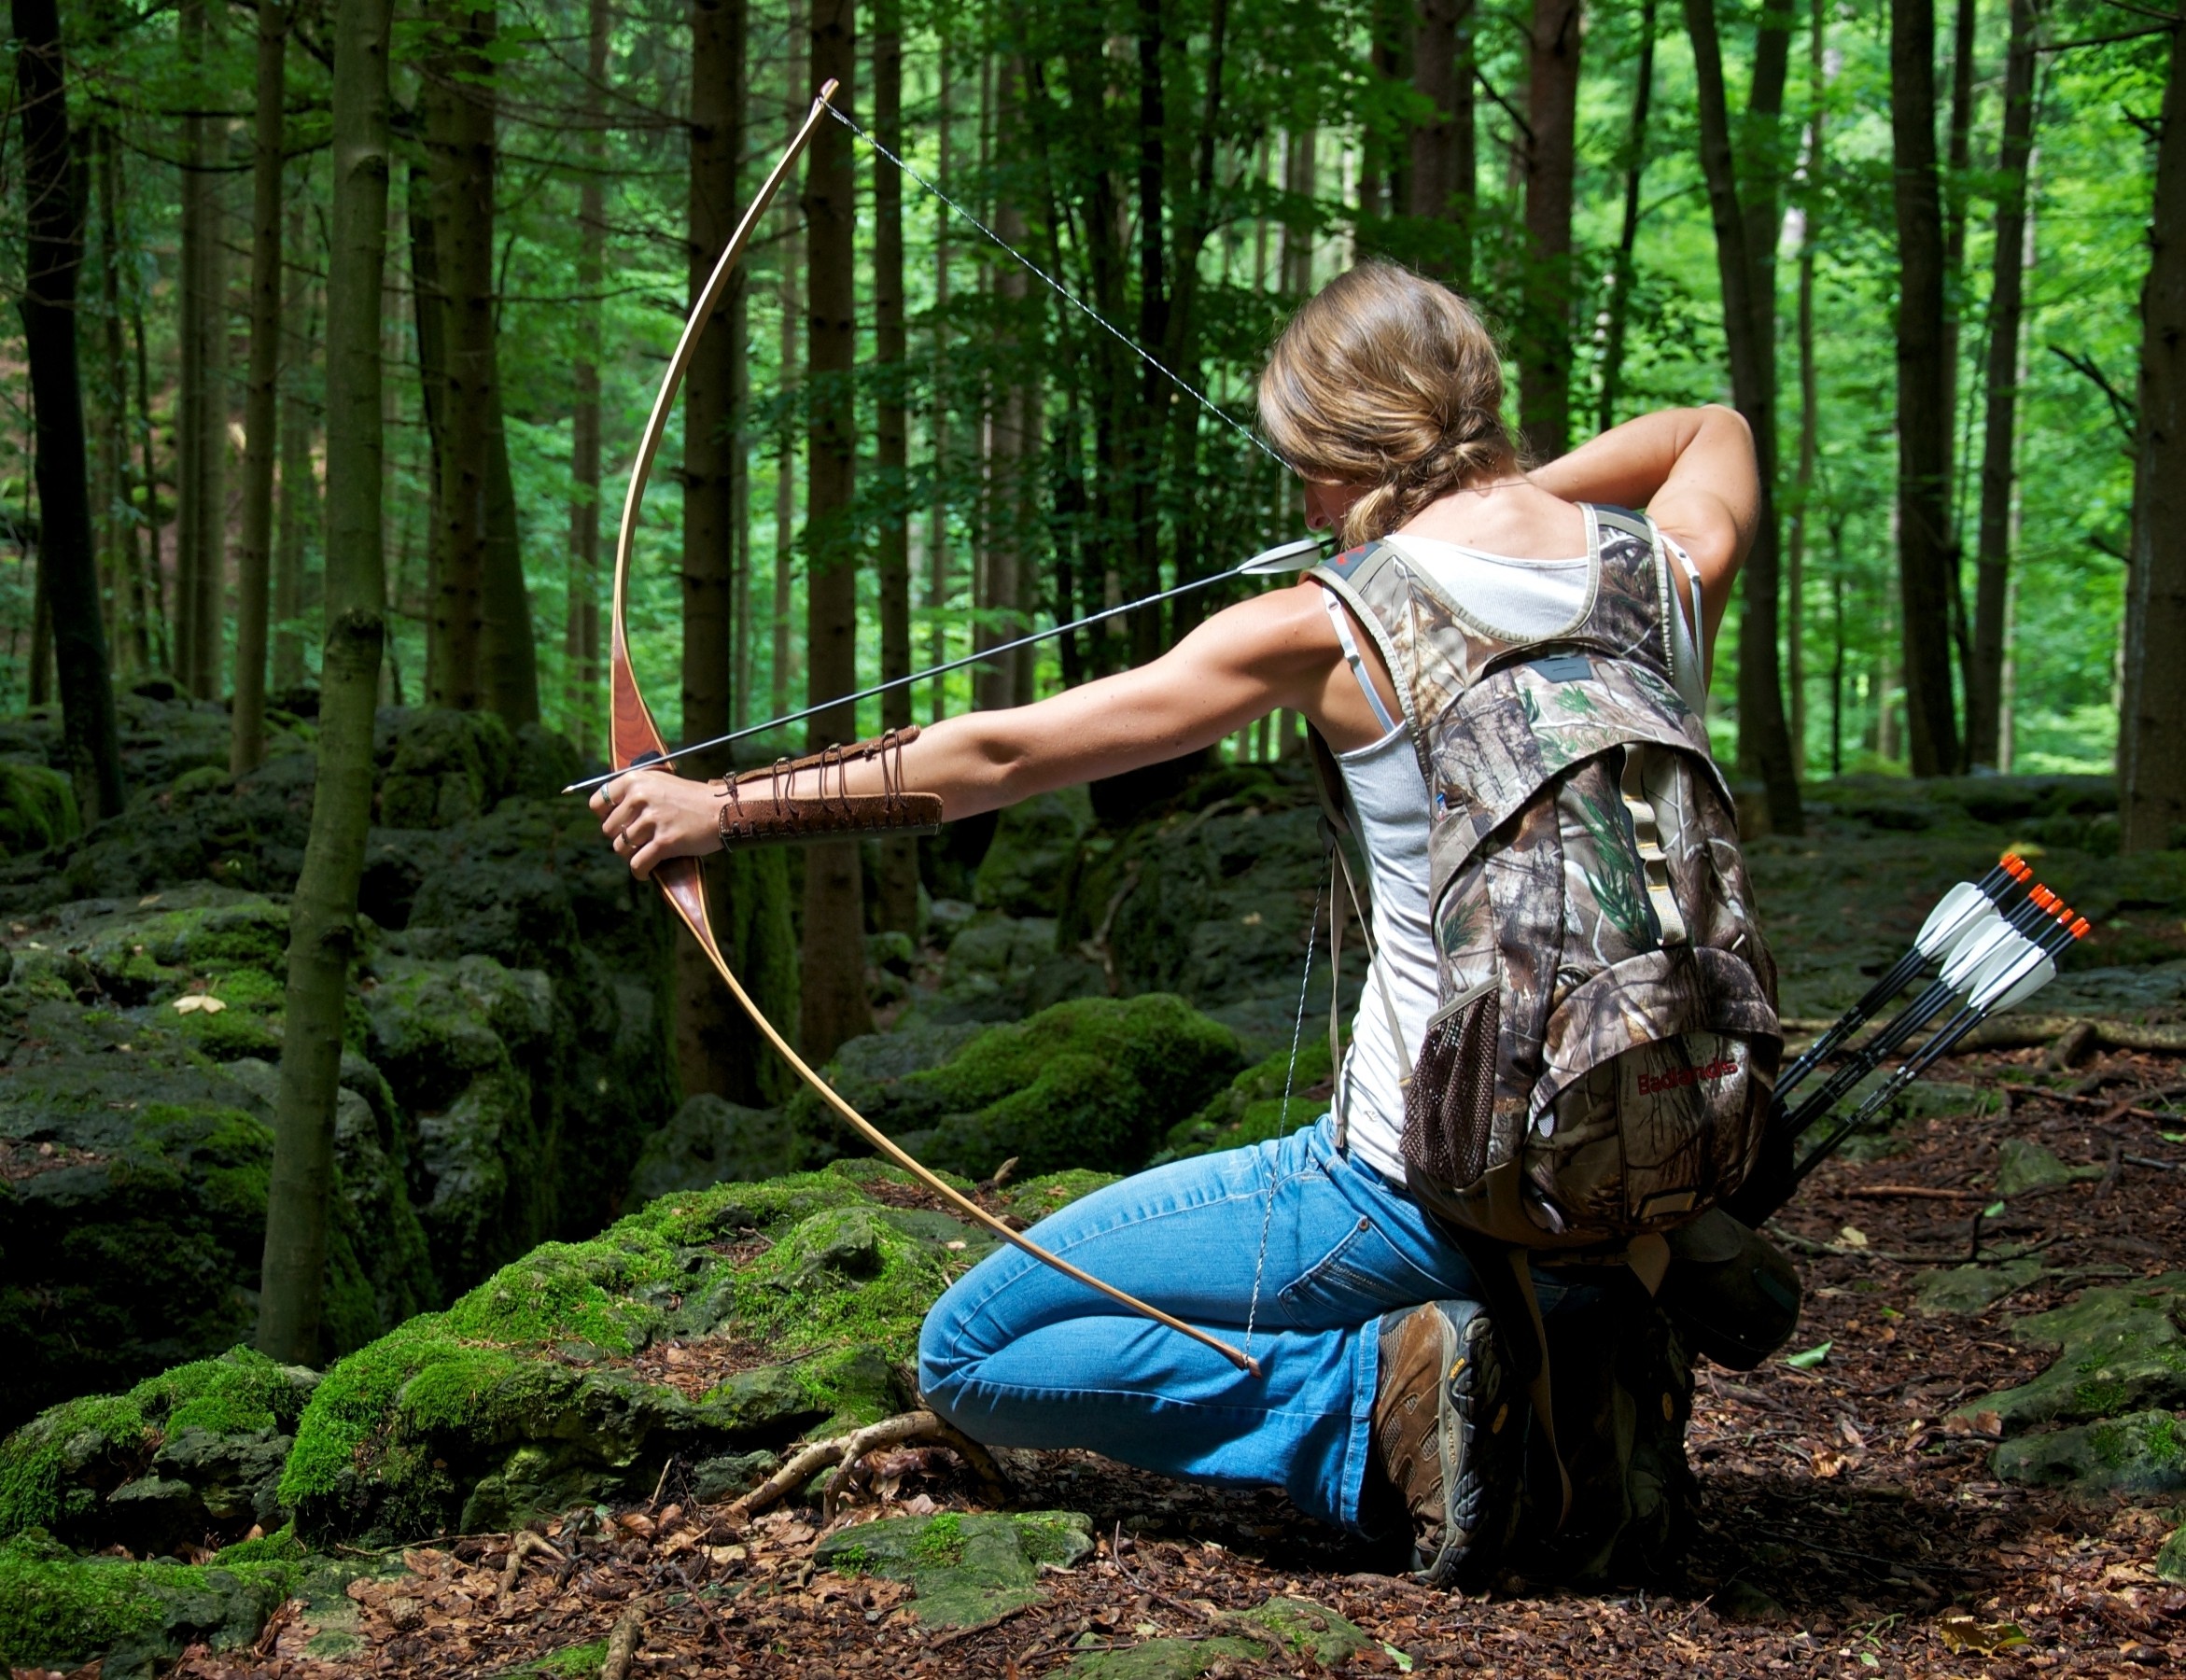 People 2342x1800 bow women hunting aiming women outdoors forest trees kneeling weapon arrows outdoors archer archery bow and arrow